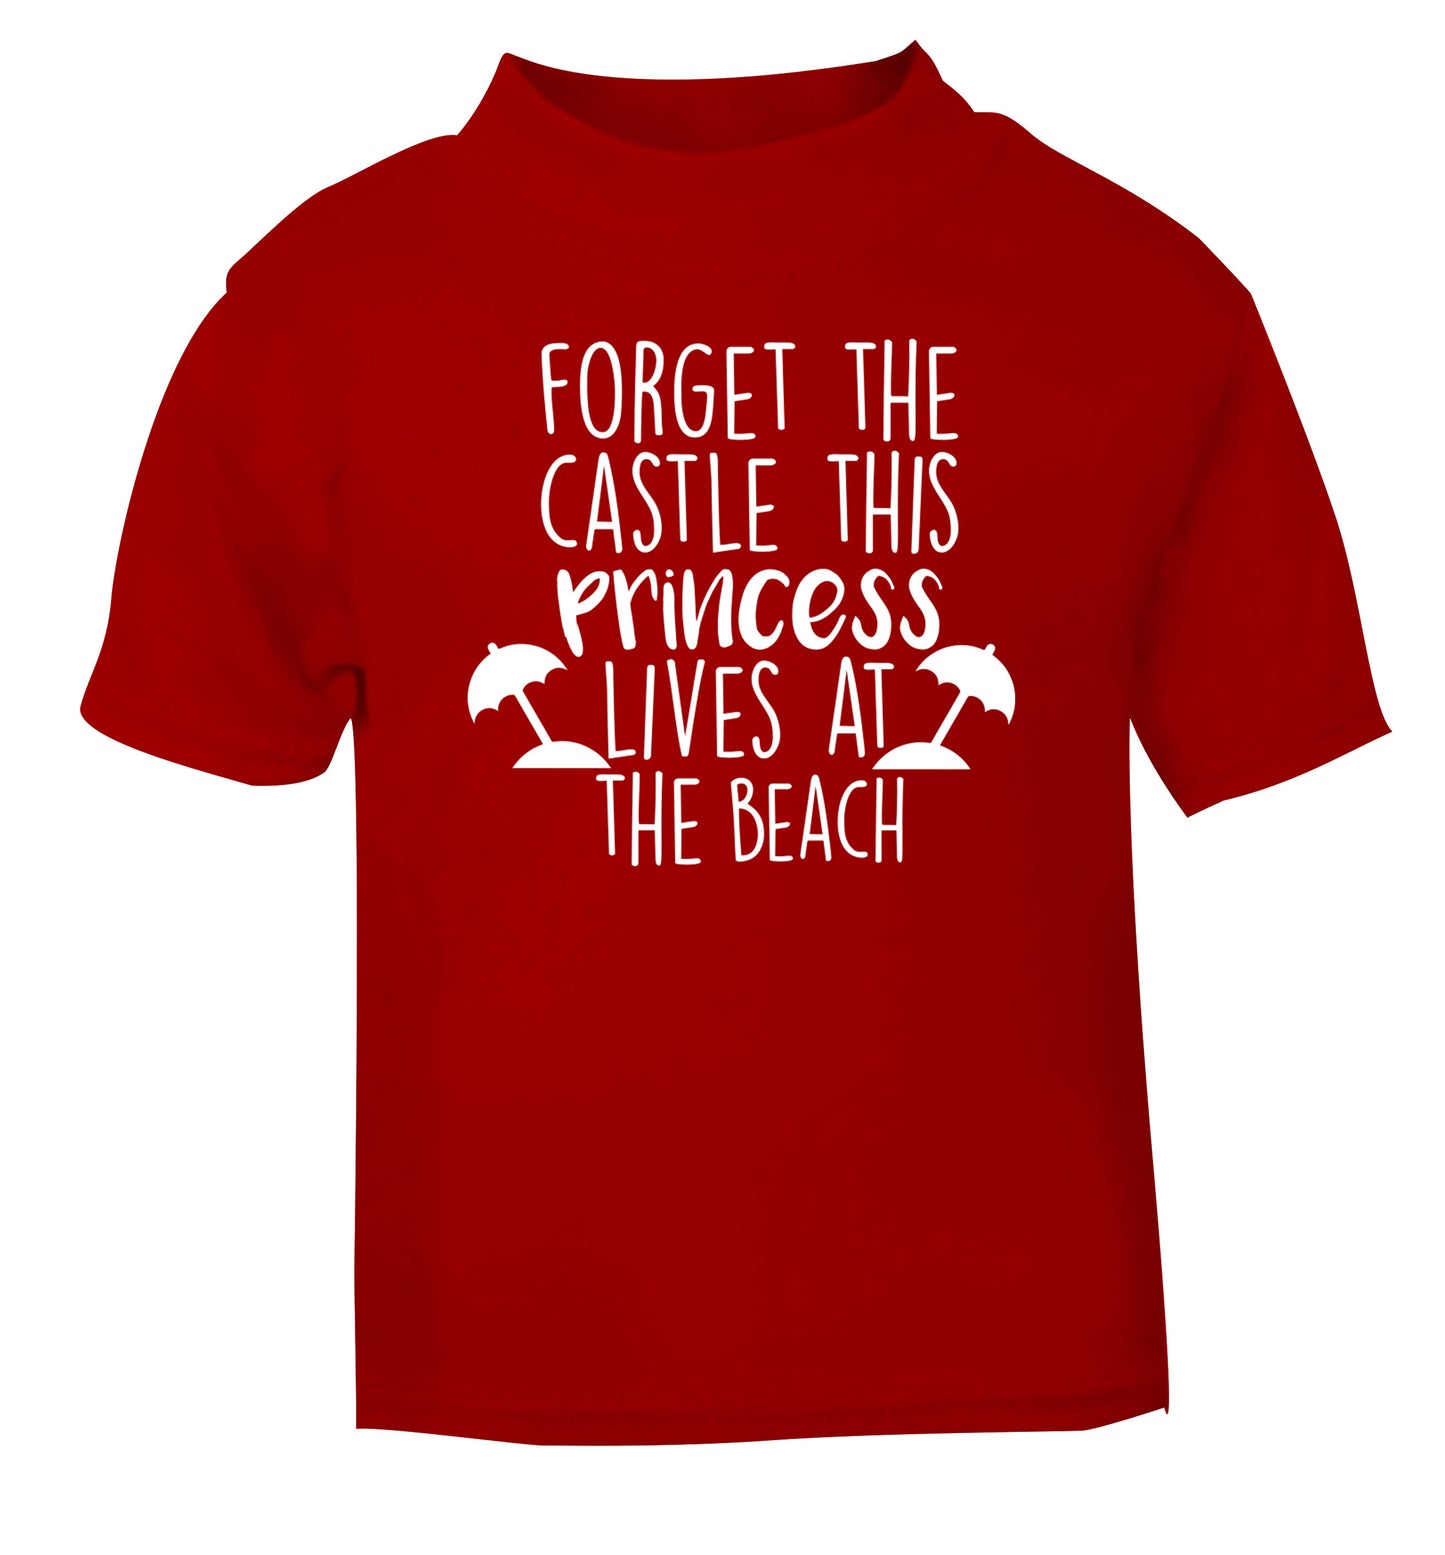 Forget the castle this princess lives at the beach red Baby Toddler Tshirt 2 Years